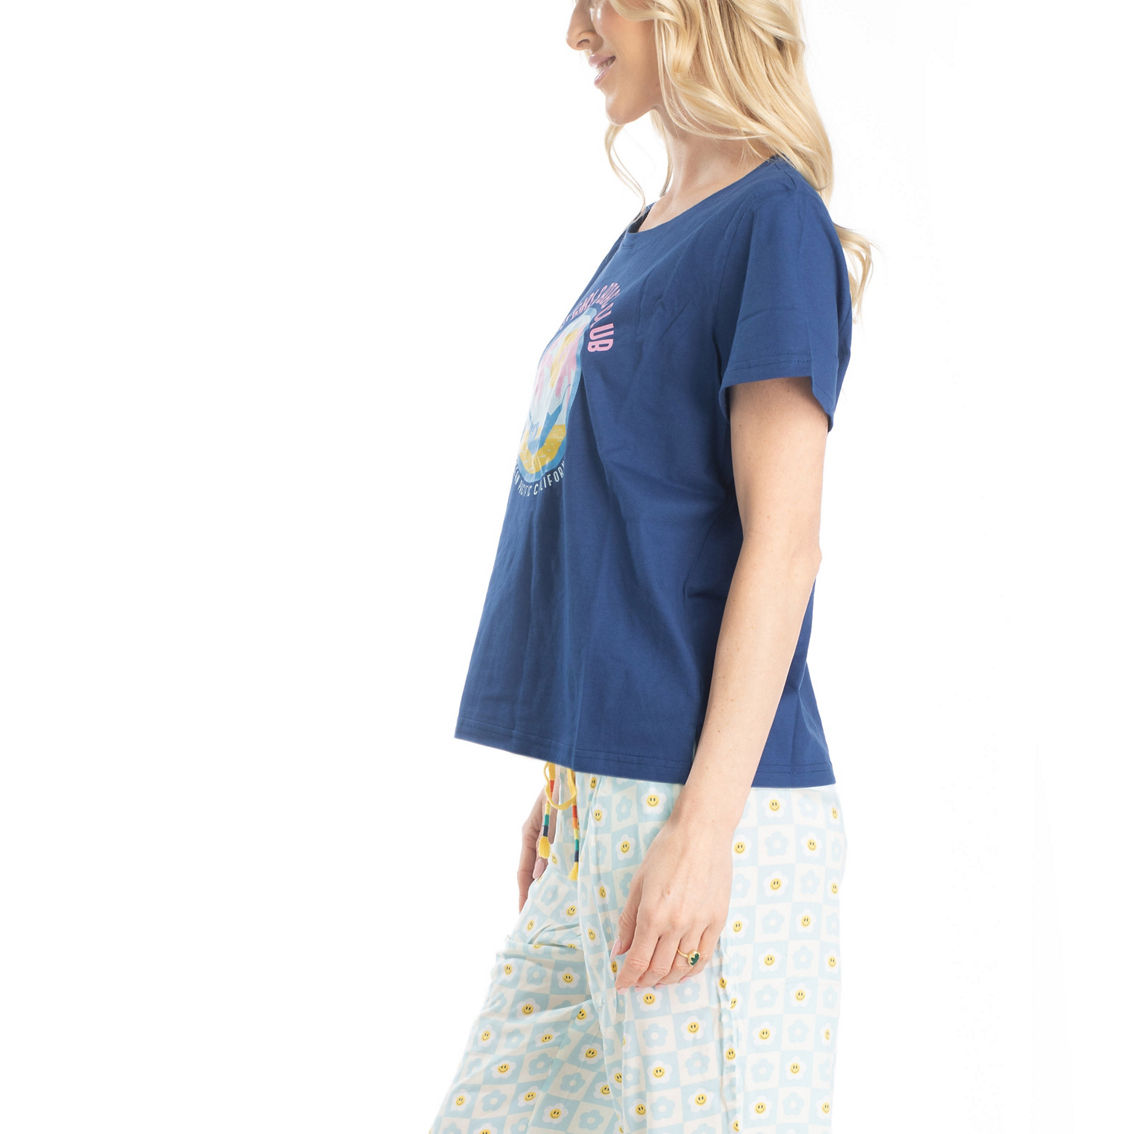 Ocean  Pacific Pacific Vibes Tshirt/Voile pant - Image 2 of 2